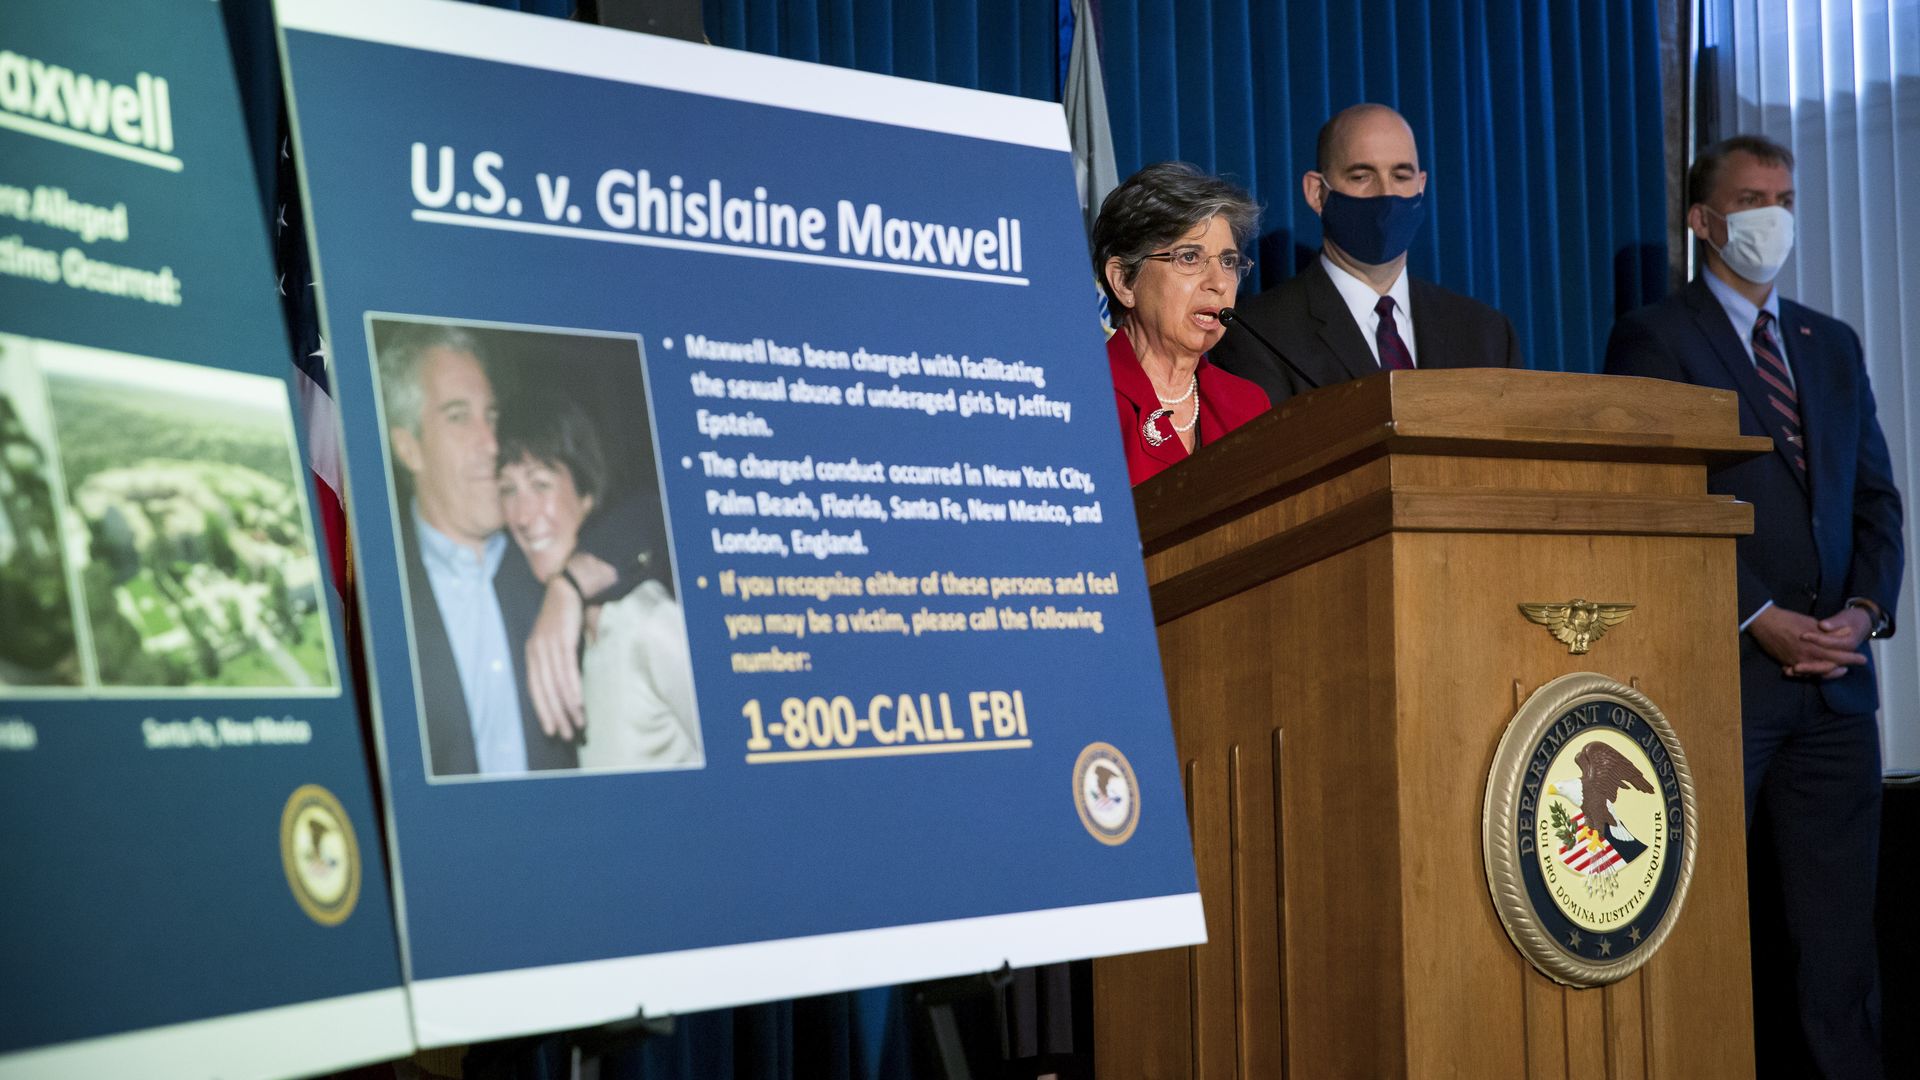 Audrey Strauss, acting U.S. attorney for the Southern District of New York, speaks at a press conference announcing the arrest of Ghislaine Maxwell in July 2020.